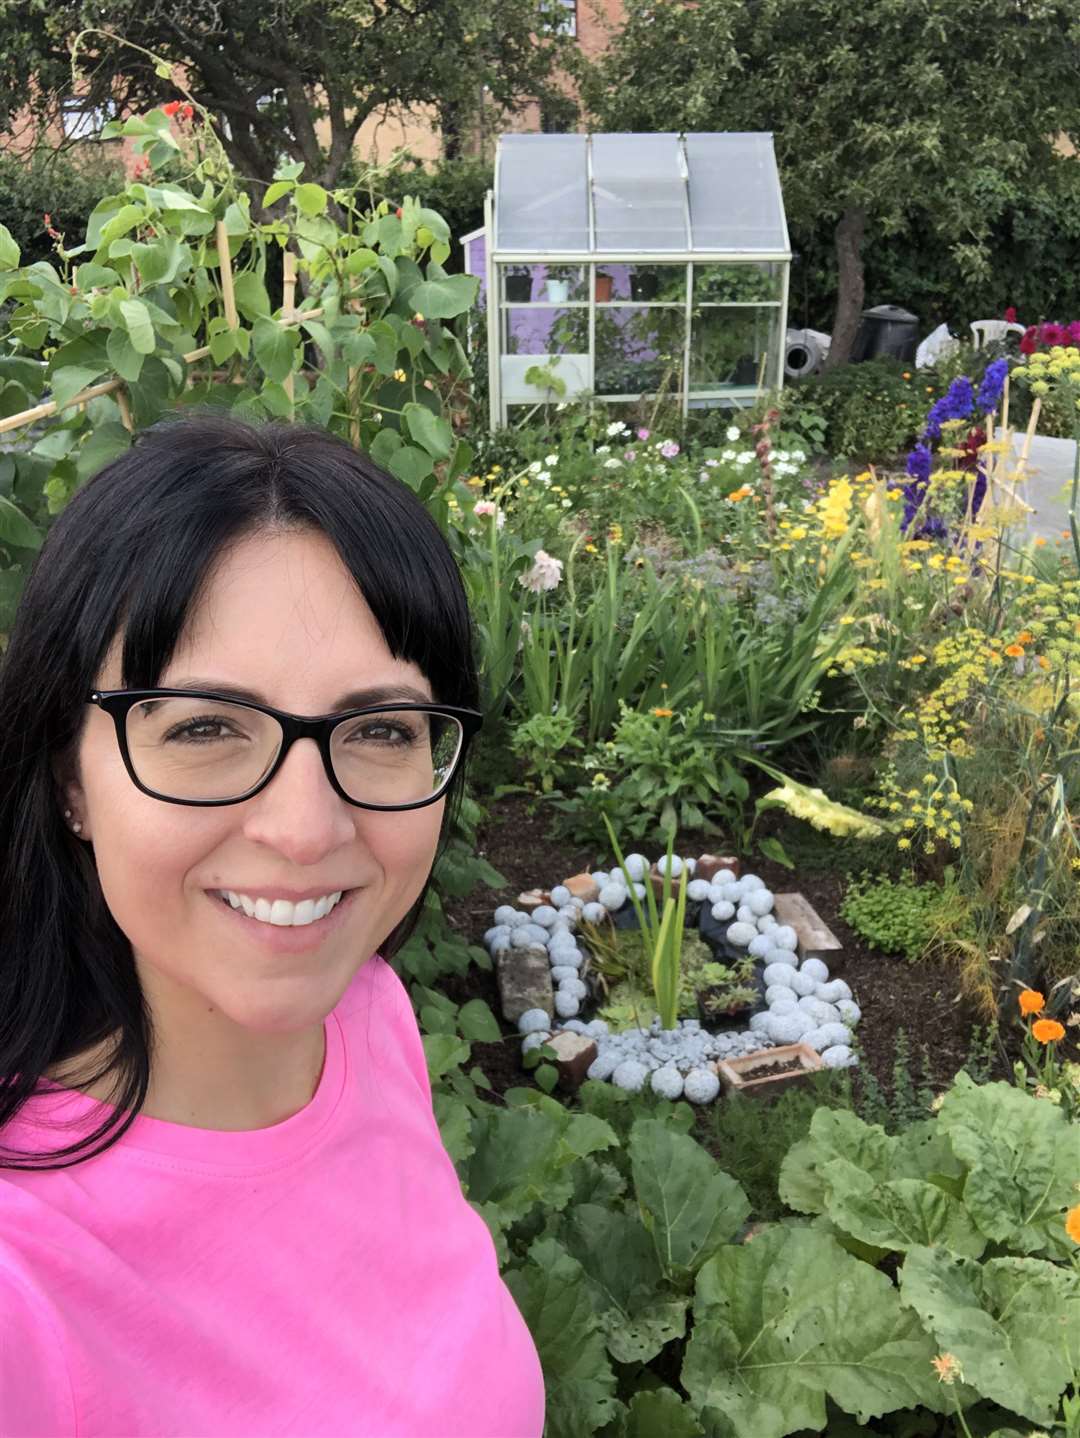 Ellen Mary co-hosts The Plant Based Podcast with Michael Perry. Picture: Ellen Mary Gardening/PA